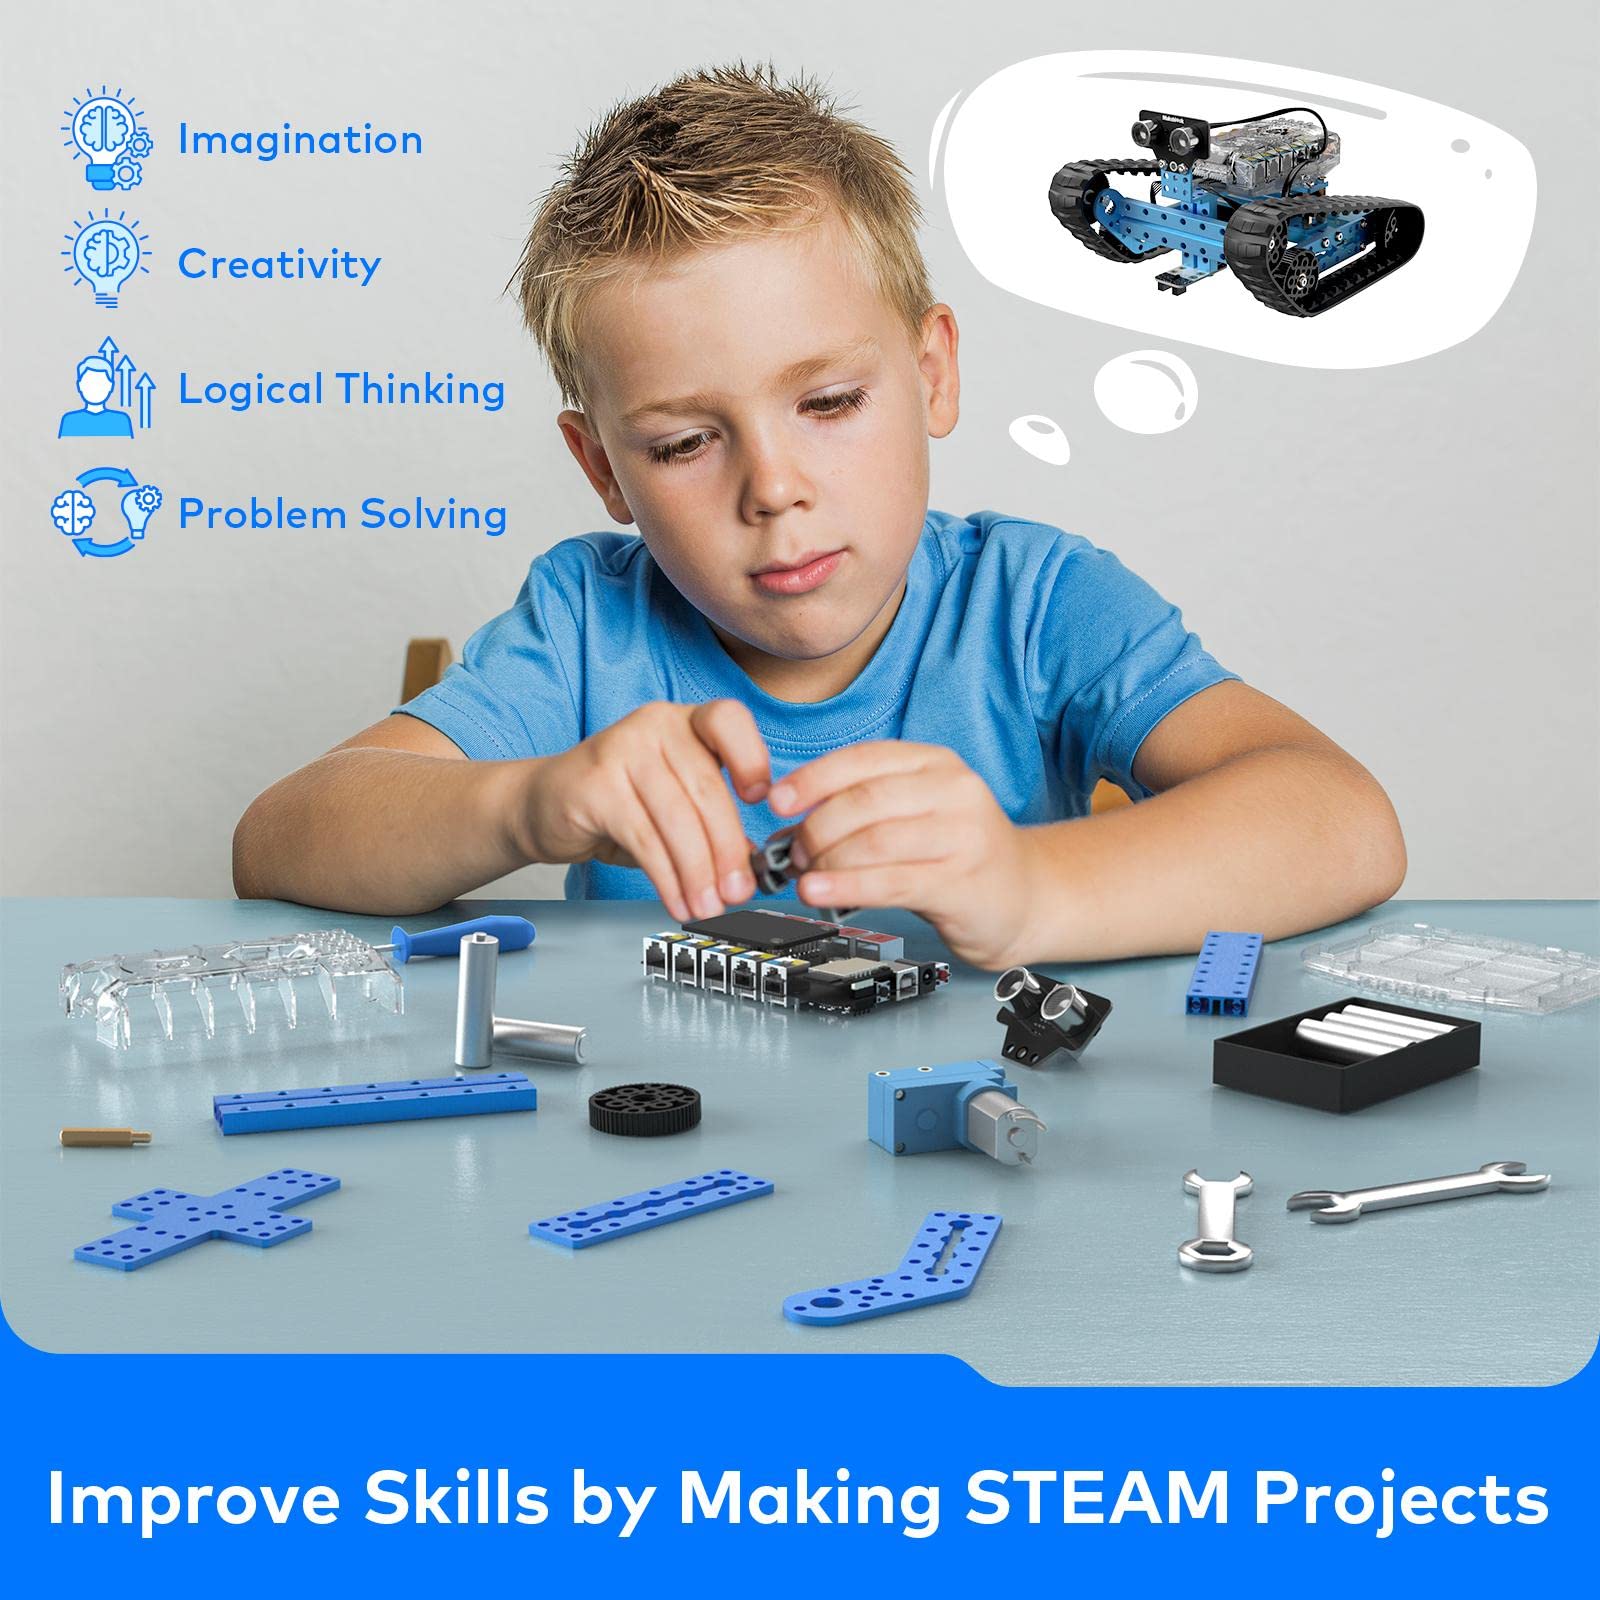 Makeblock mBot Ranger 3 in 1 Robot Toys, Coding Robot Kit STEM Educational Building Toys Support Scratch Arduino Programming, Programmable Remote Control Robot Gift for Kids Ages 10+